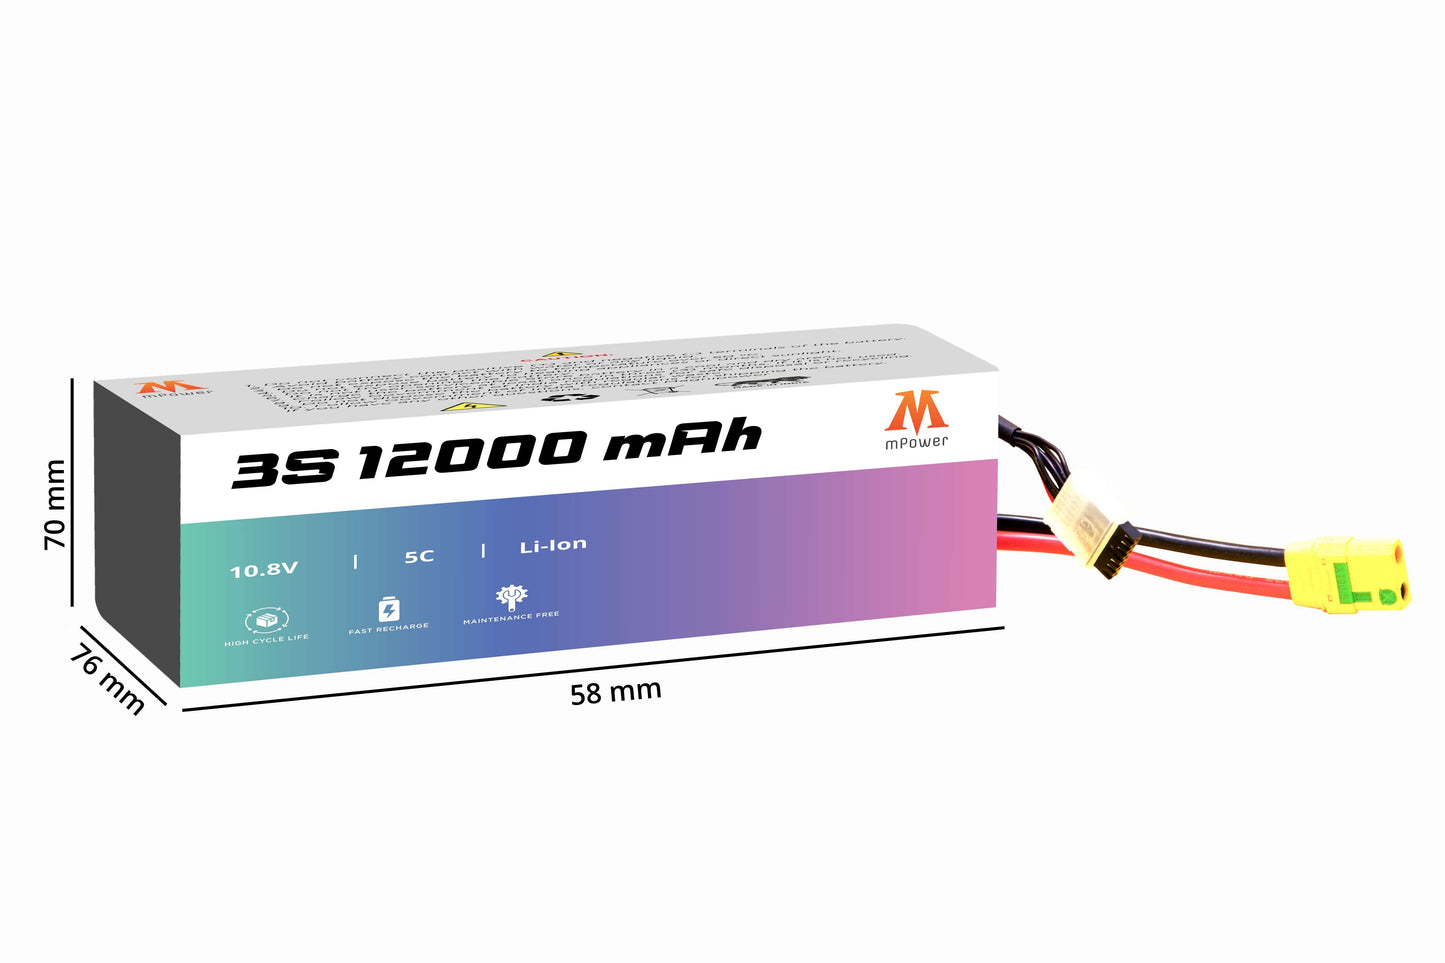 mPower 3S 12000mAh Lithium-Ion Battery for Survey Drones